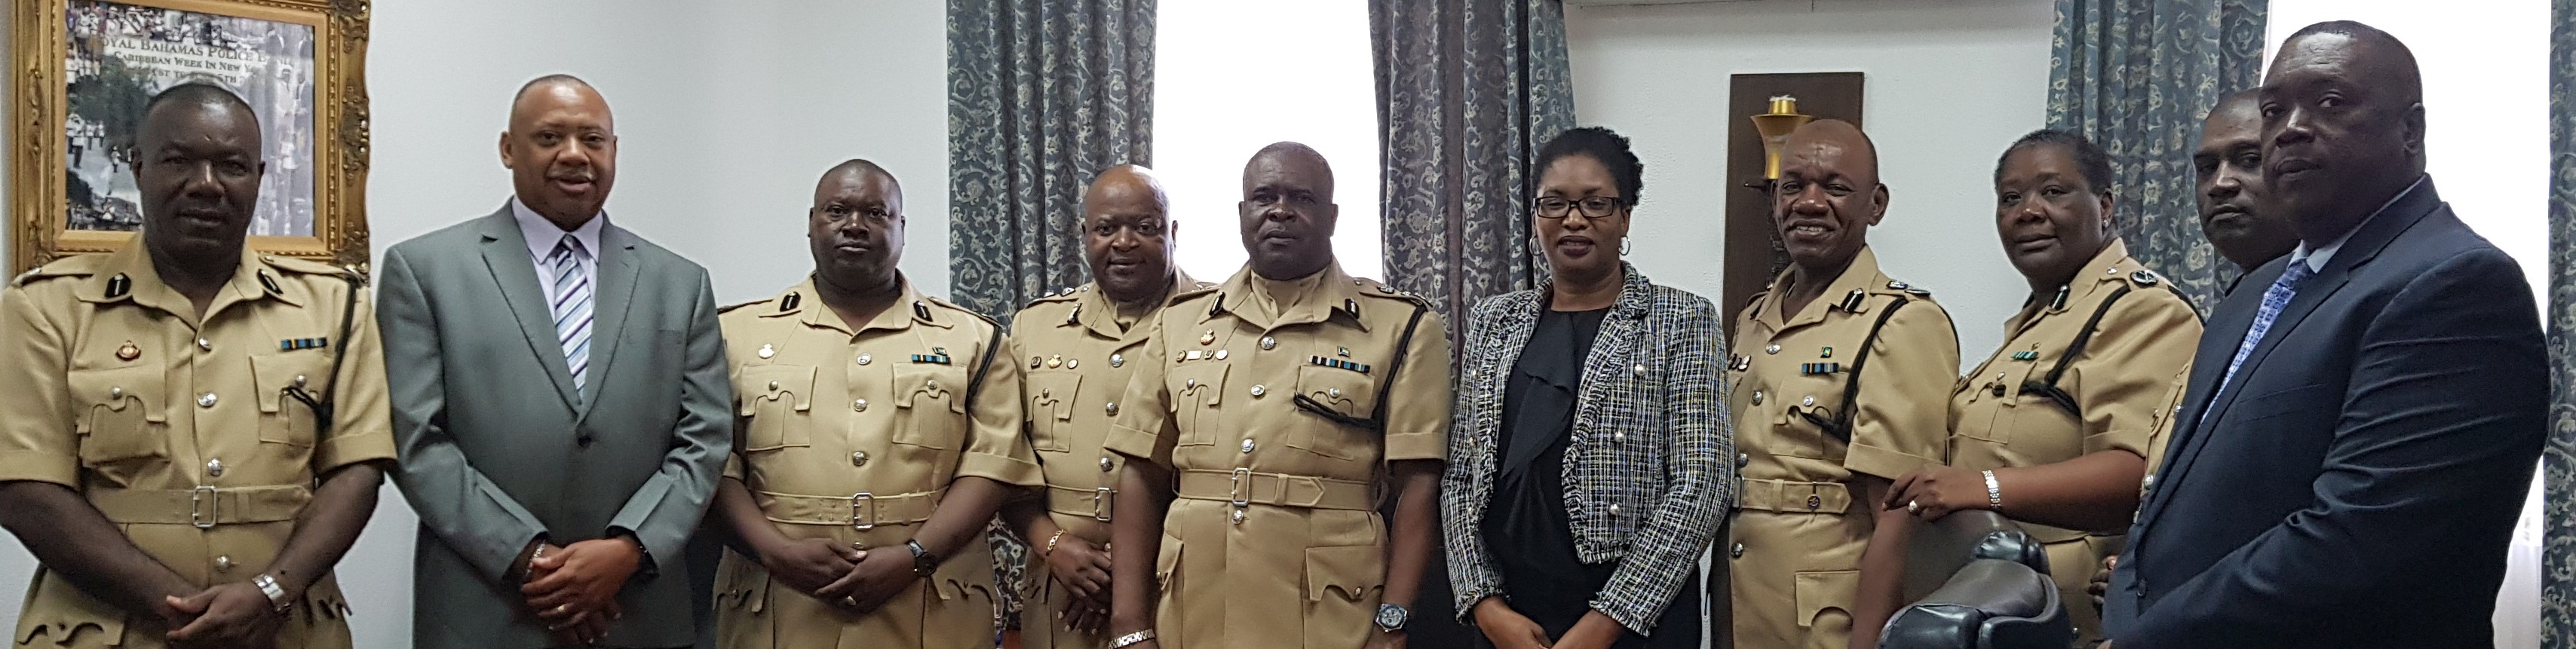 The OAS Bahamas' Country Representative Ms. Phyllis Baron paid a Courtesy Call on The Royal Bahamas Police Force Commissioner of Police Mr. Anthony Ferguson and his executive team at the RBPF Headquarter on Tuesday, March 12, 2019(March 12, 2019)